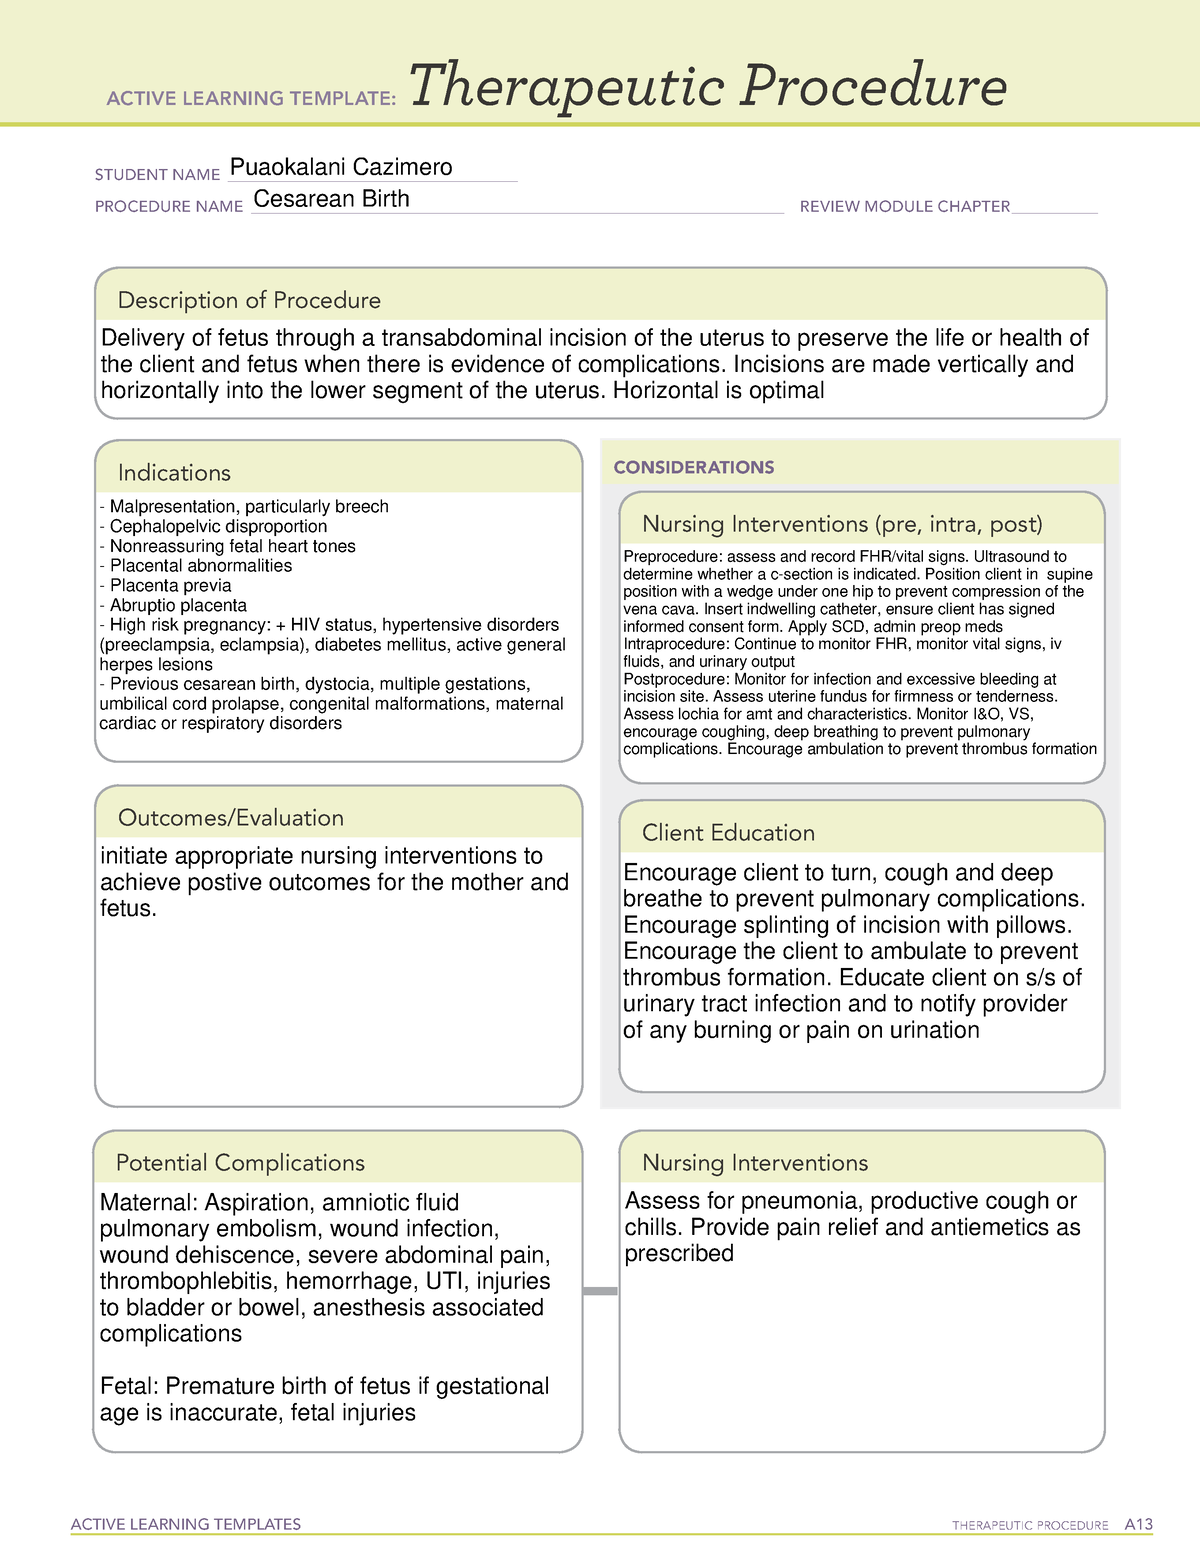 Cesarean birth 306 - n/a - ACTIVE LEARNING TEMPLATES THERAPEUTIC ...